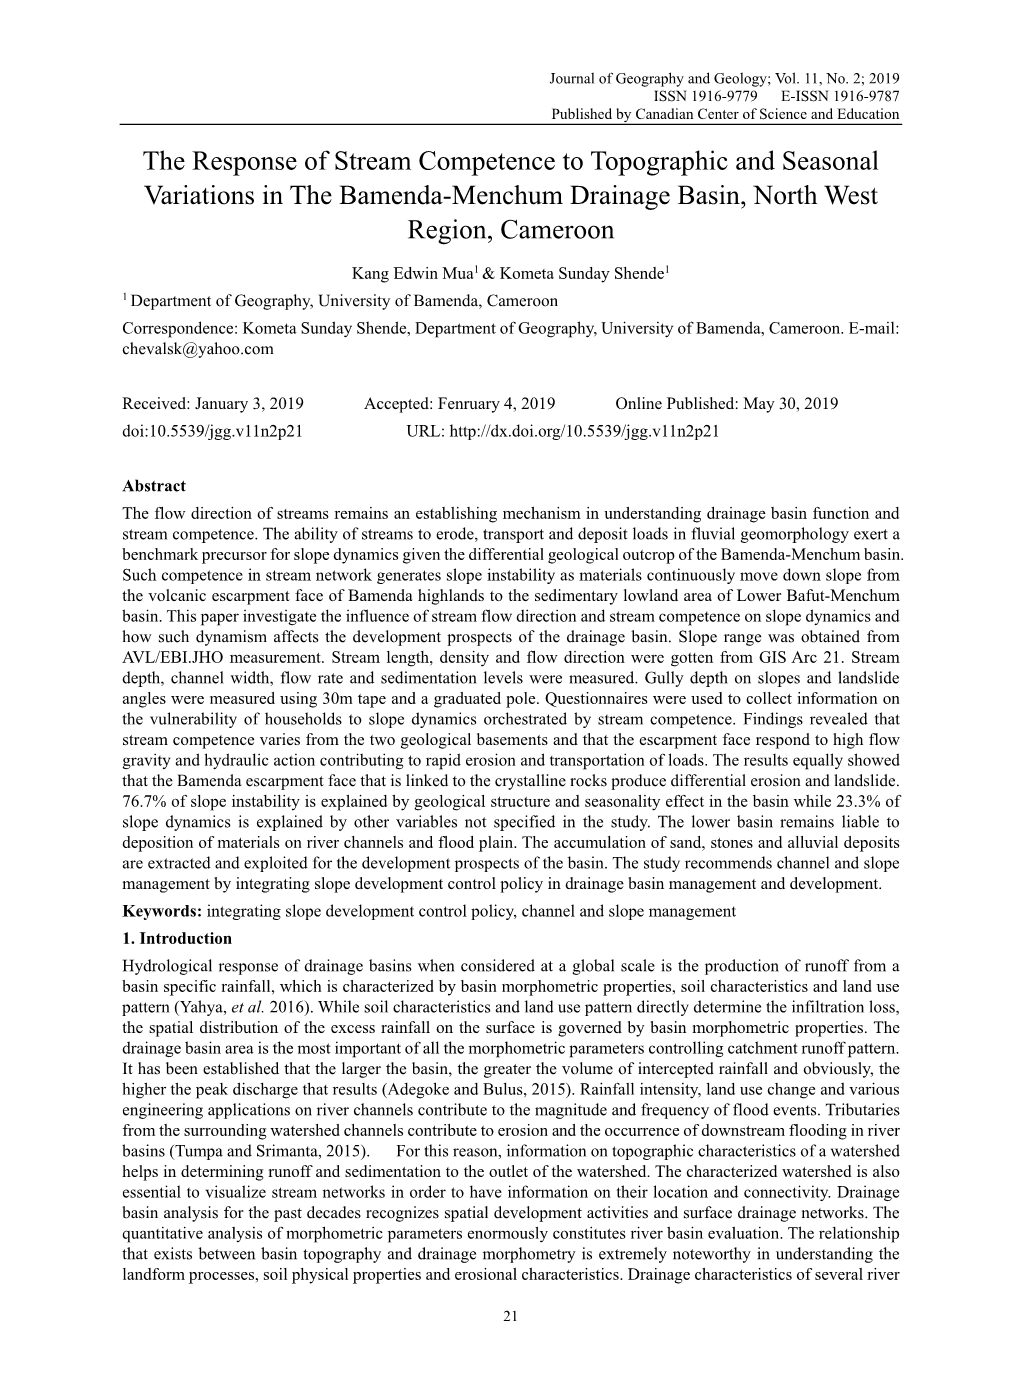 The Response of Stream Competence to Topographic and Seasonal Variations in the Bamenda-Menchum Drainage Basin, North West Region, Cameroon